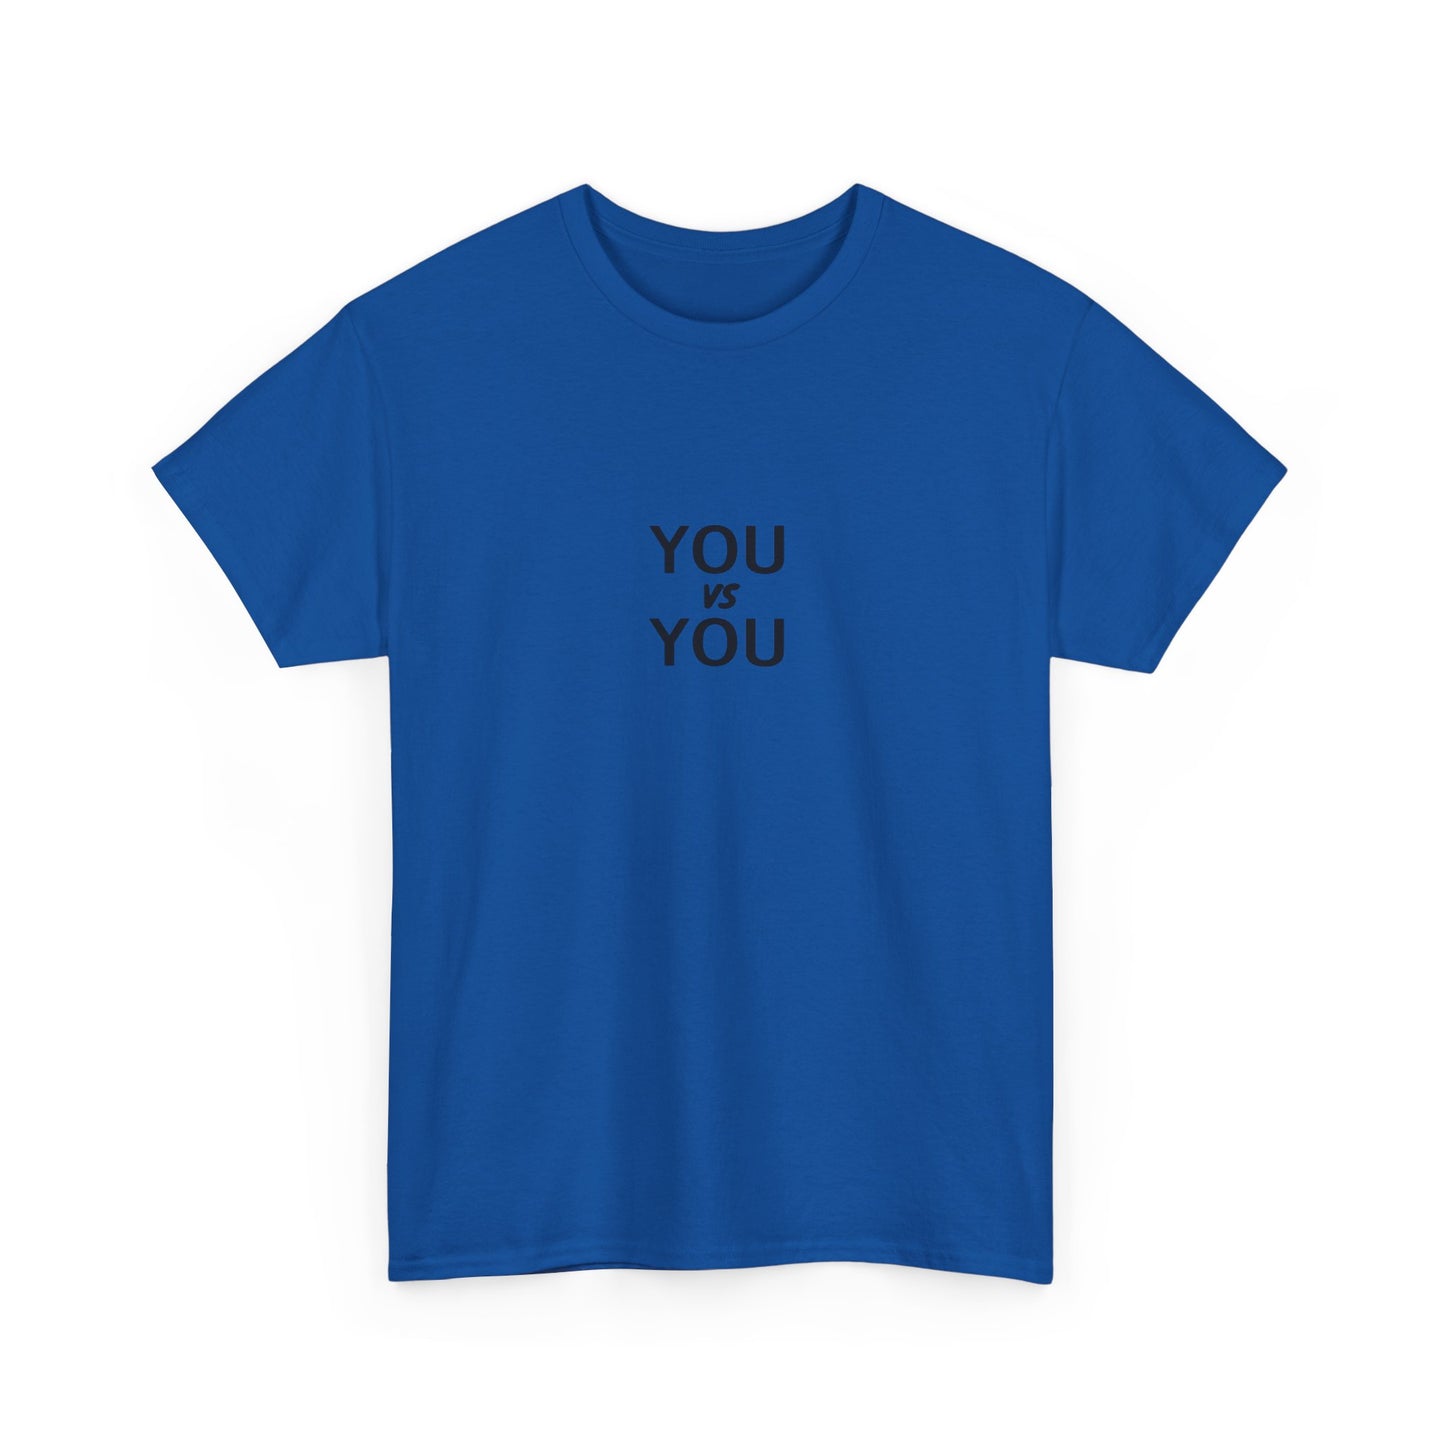 You VS You fitness T-shirt - Heavy Cotton Tee